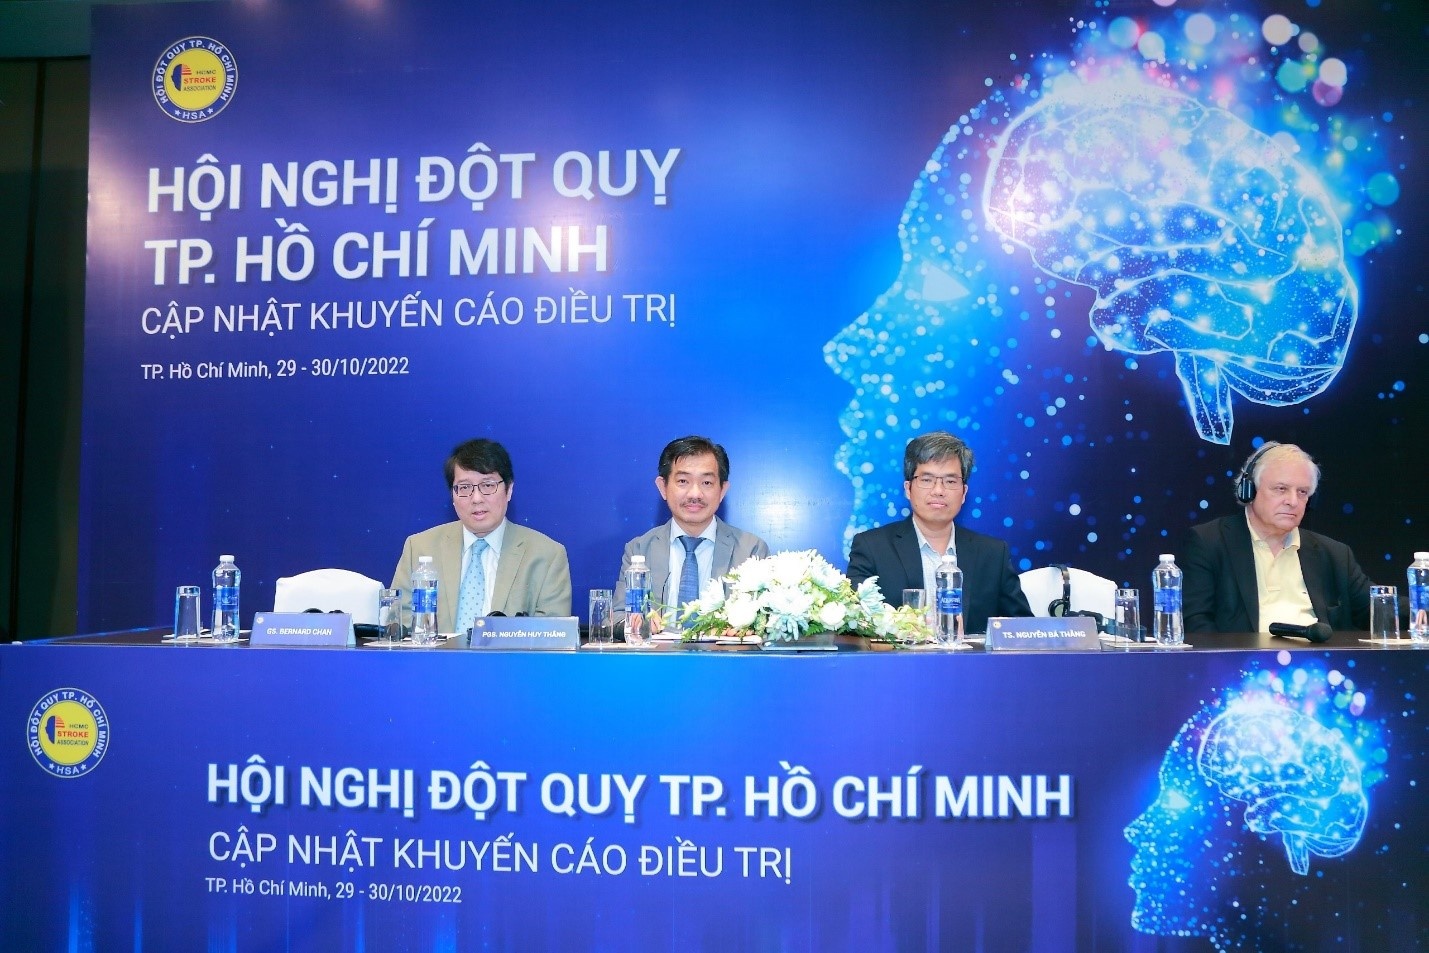 Bayer gives support to Ho Chi Minh City Stroke Association